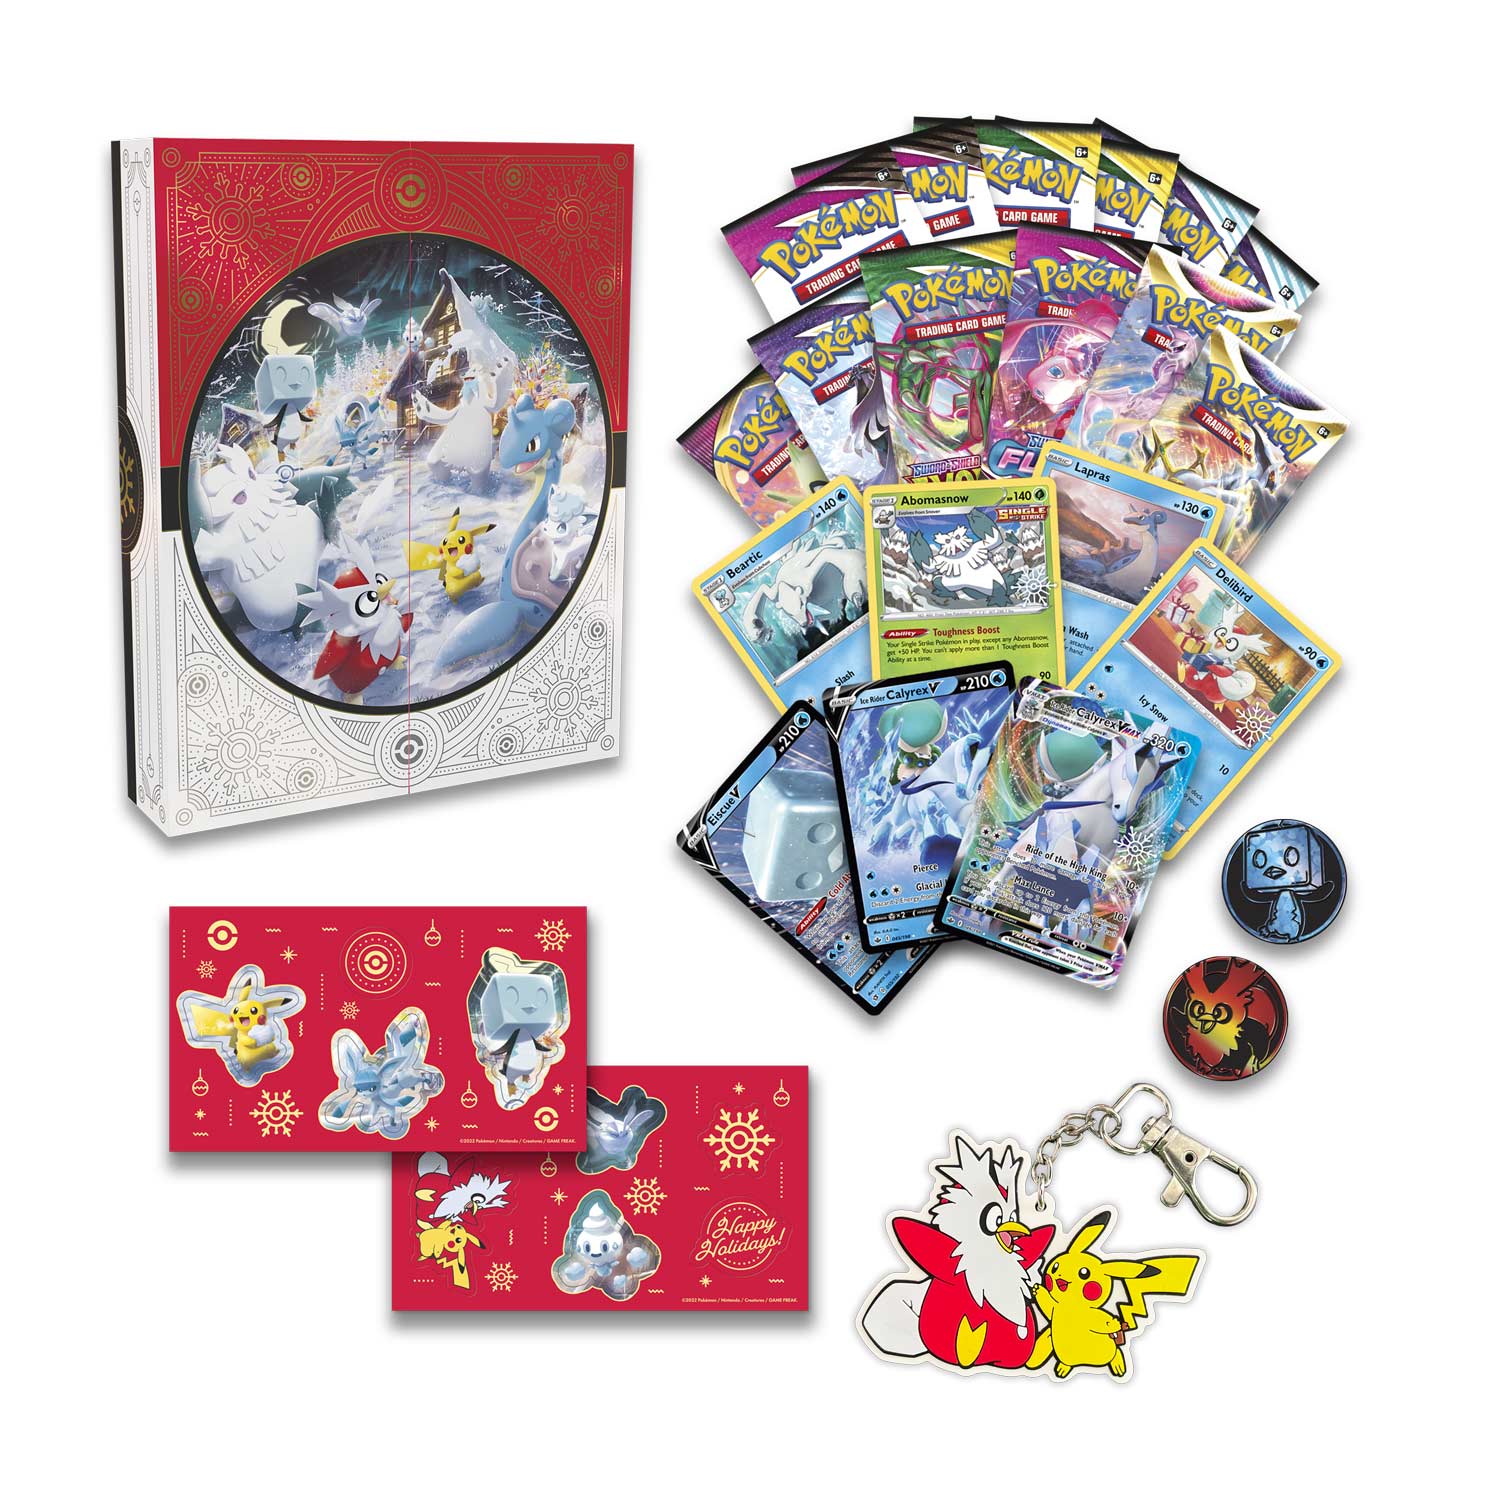 "Pokemon TCG Holiday Calendar" Full Contents and Pricing Revealed